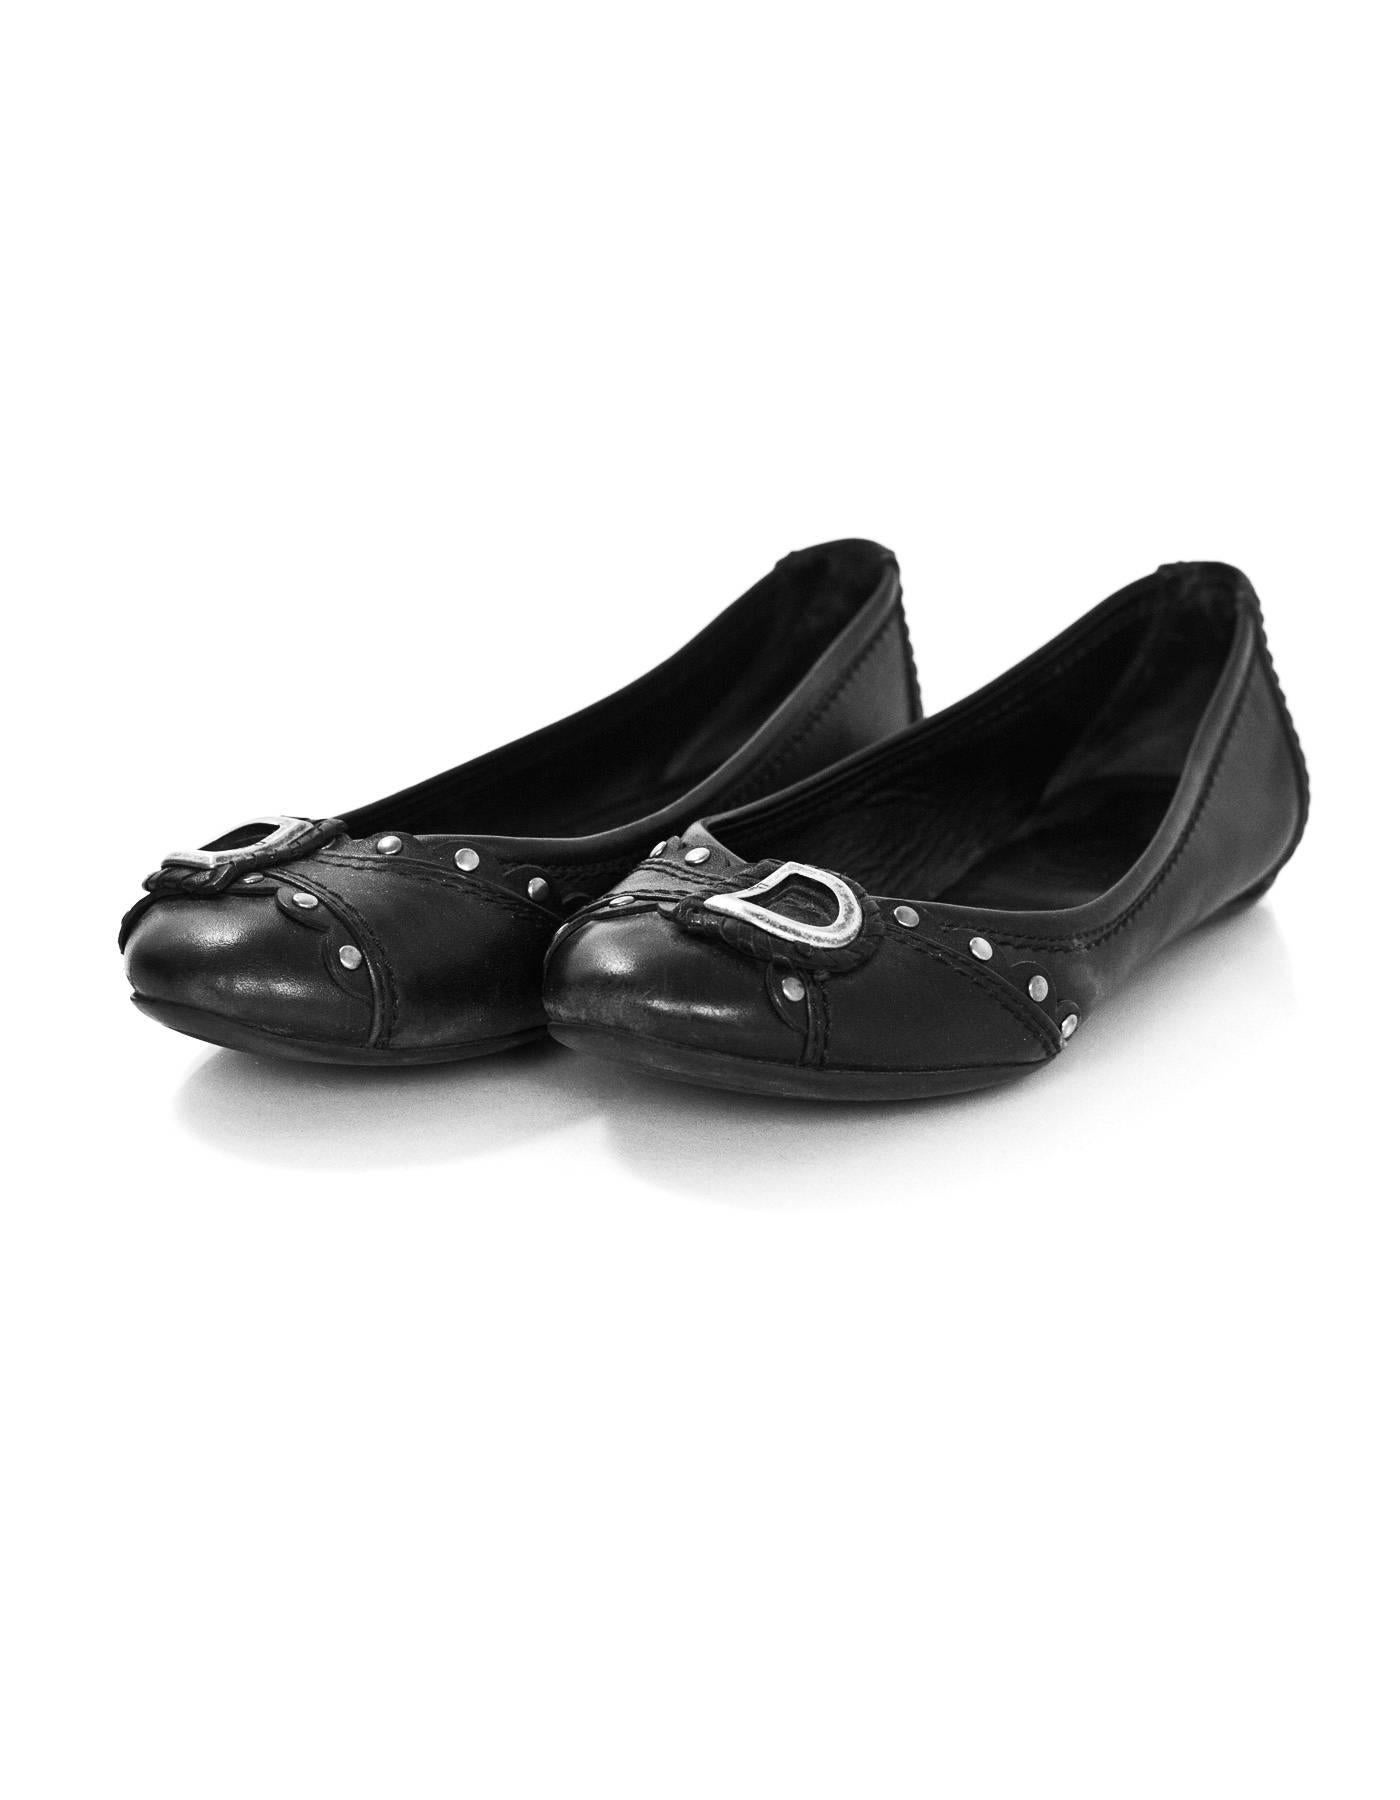 Christian Dior Black Leather D Flats Sz 35.5

Color: Black
Materials: Leather, metal
Closure/Opening: Slide on
Sole Stamp: Dior
Overall Condition: Very good pre-owned condition with the exception of moderate wear and soiling at insoles and